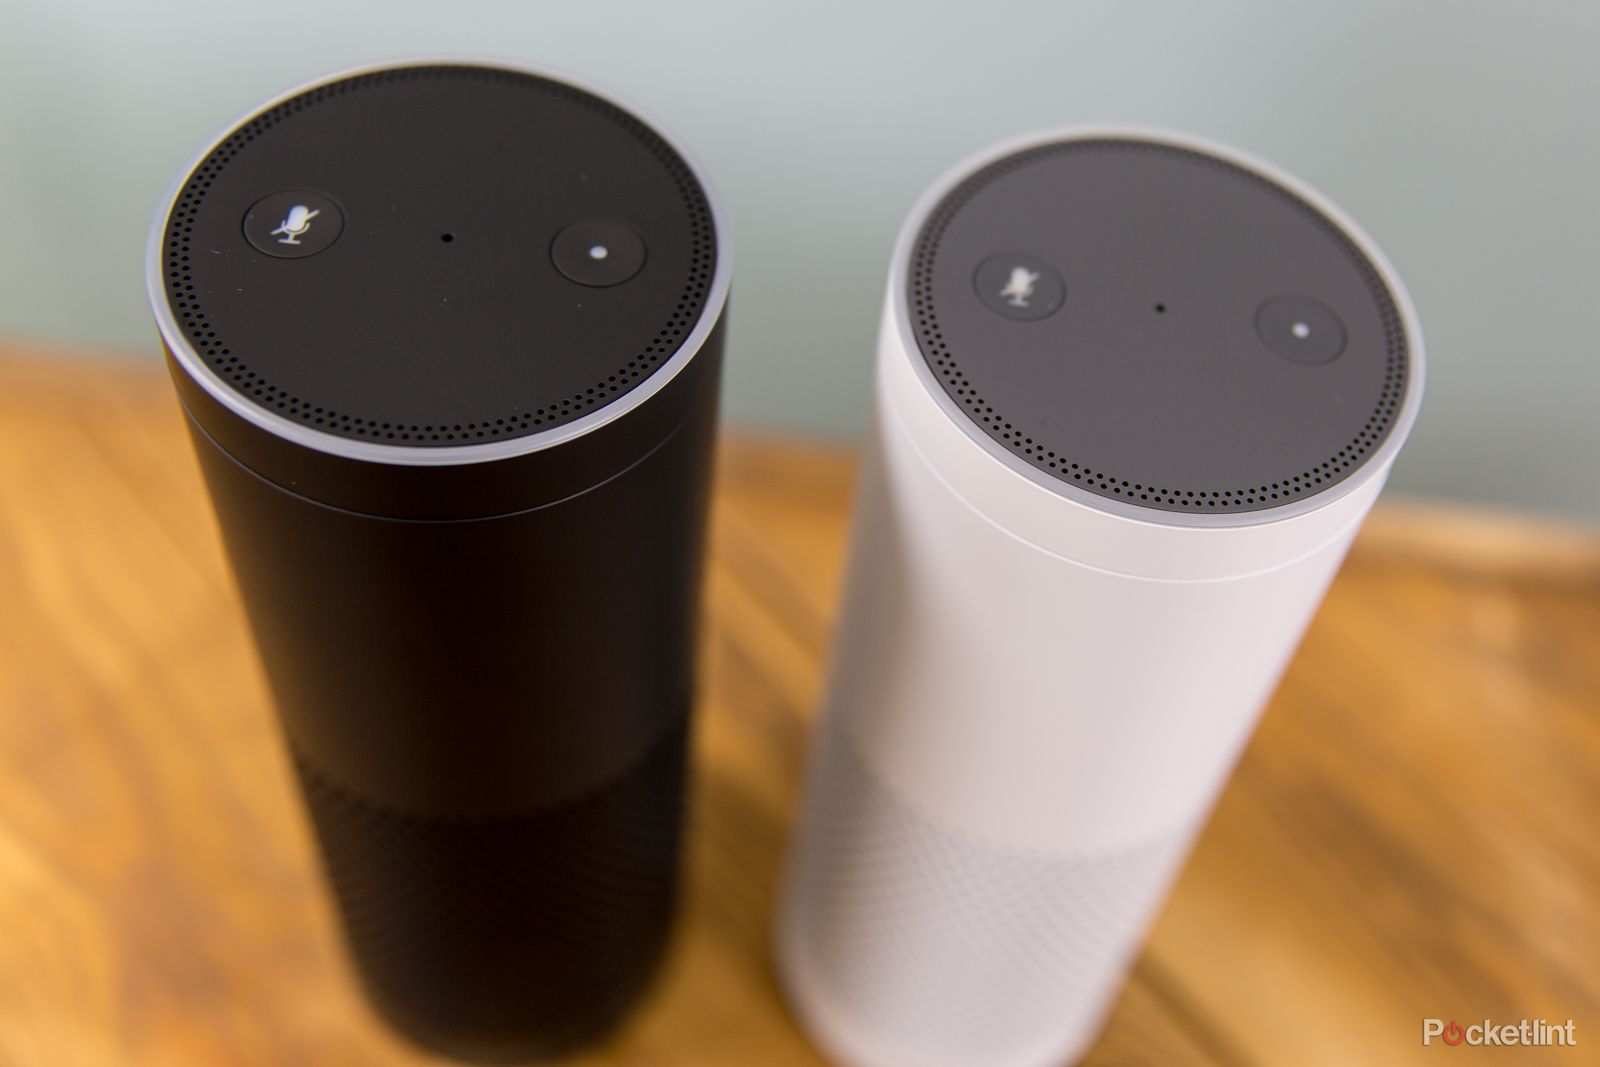 amazon echo gets cool new features check out what alexa can do now image 1